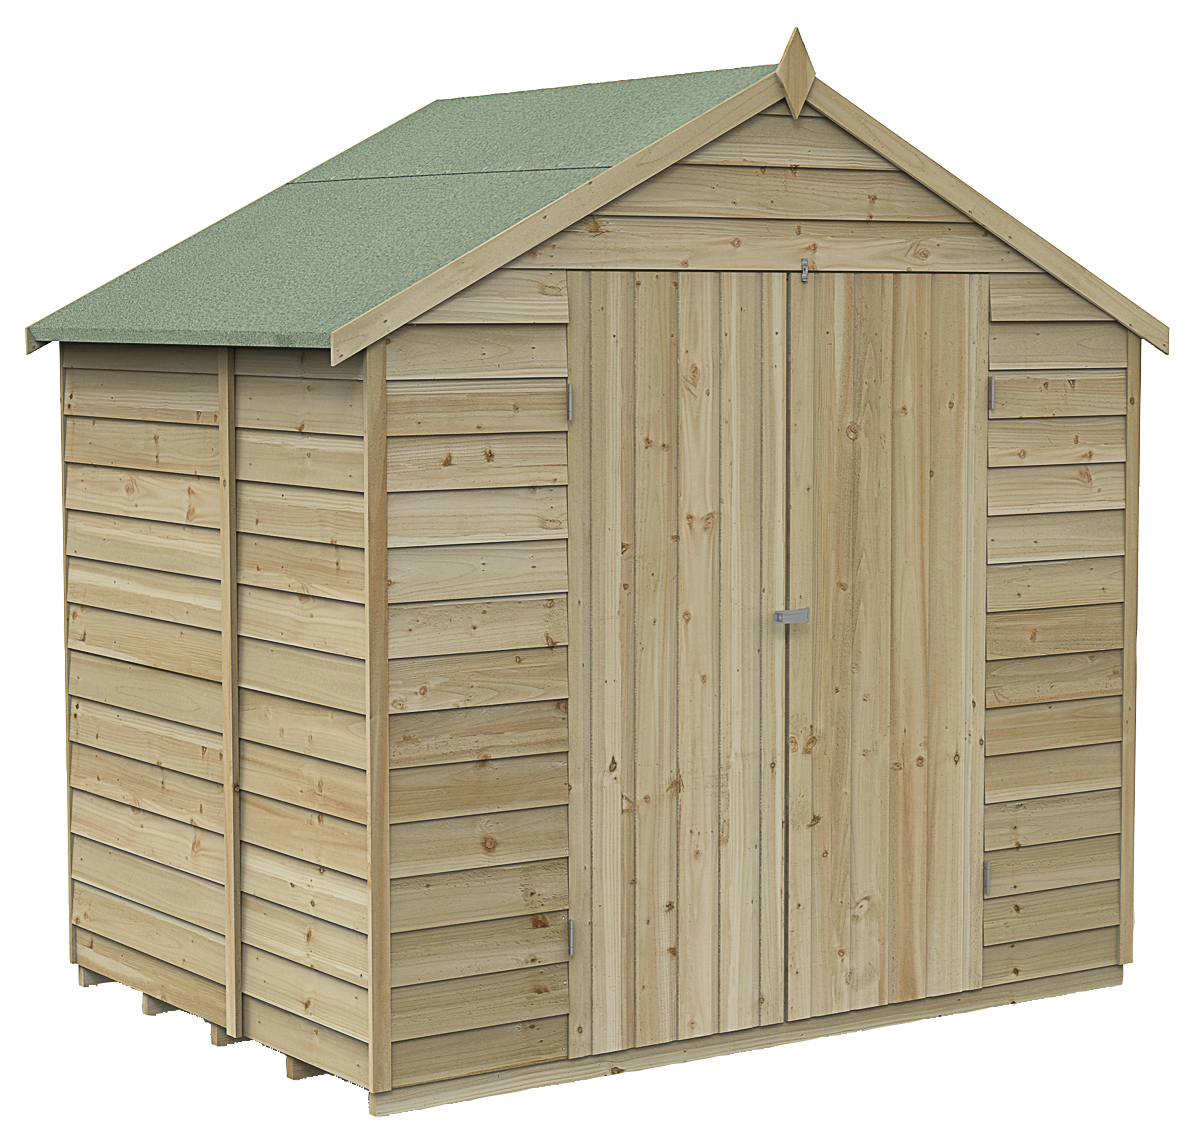 Image of Forest Garden 7 x 5ft 4Life Apex Overlap Pressure Treated Double Door Windowless Shed